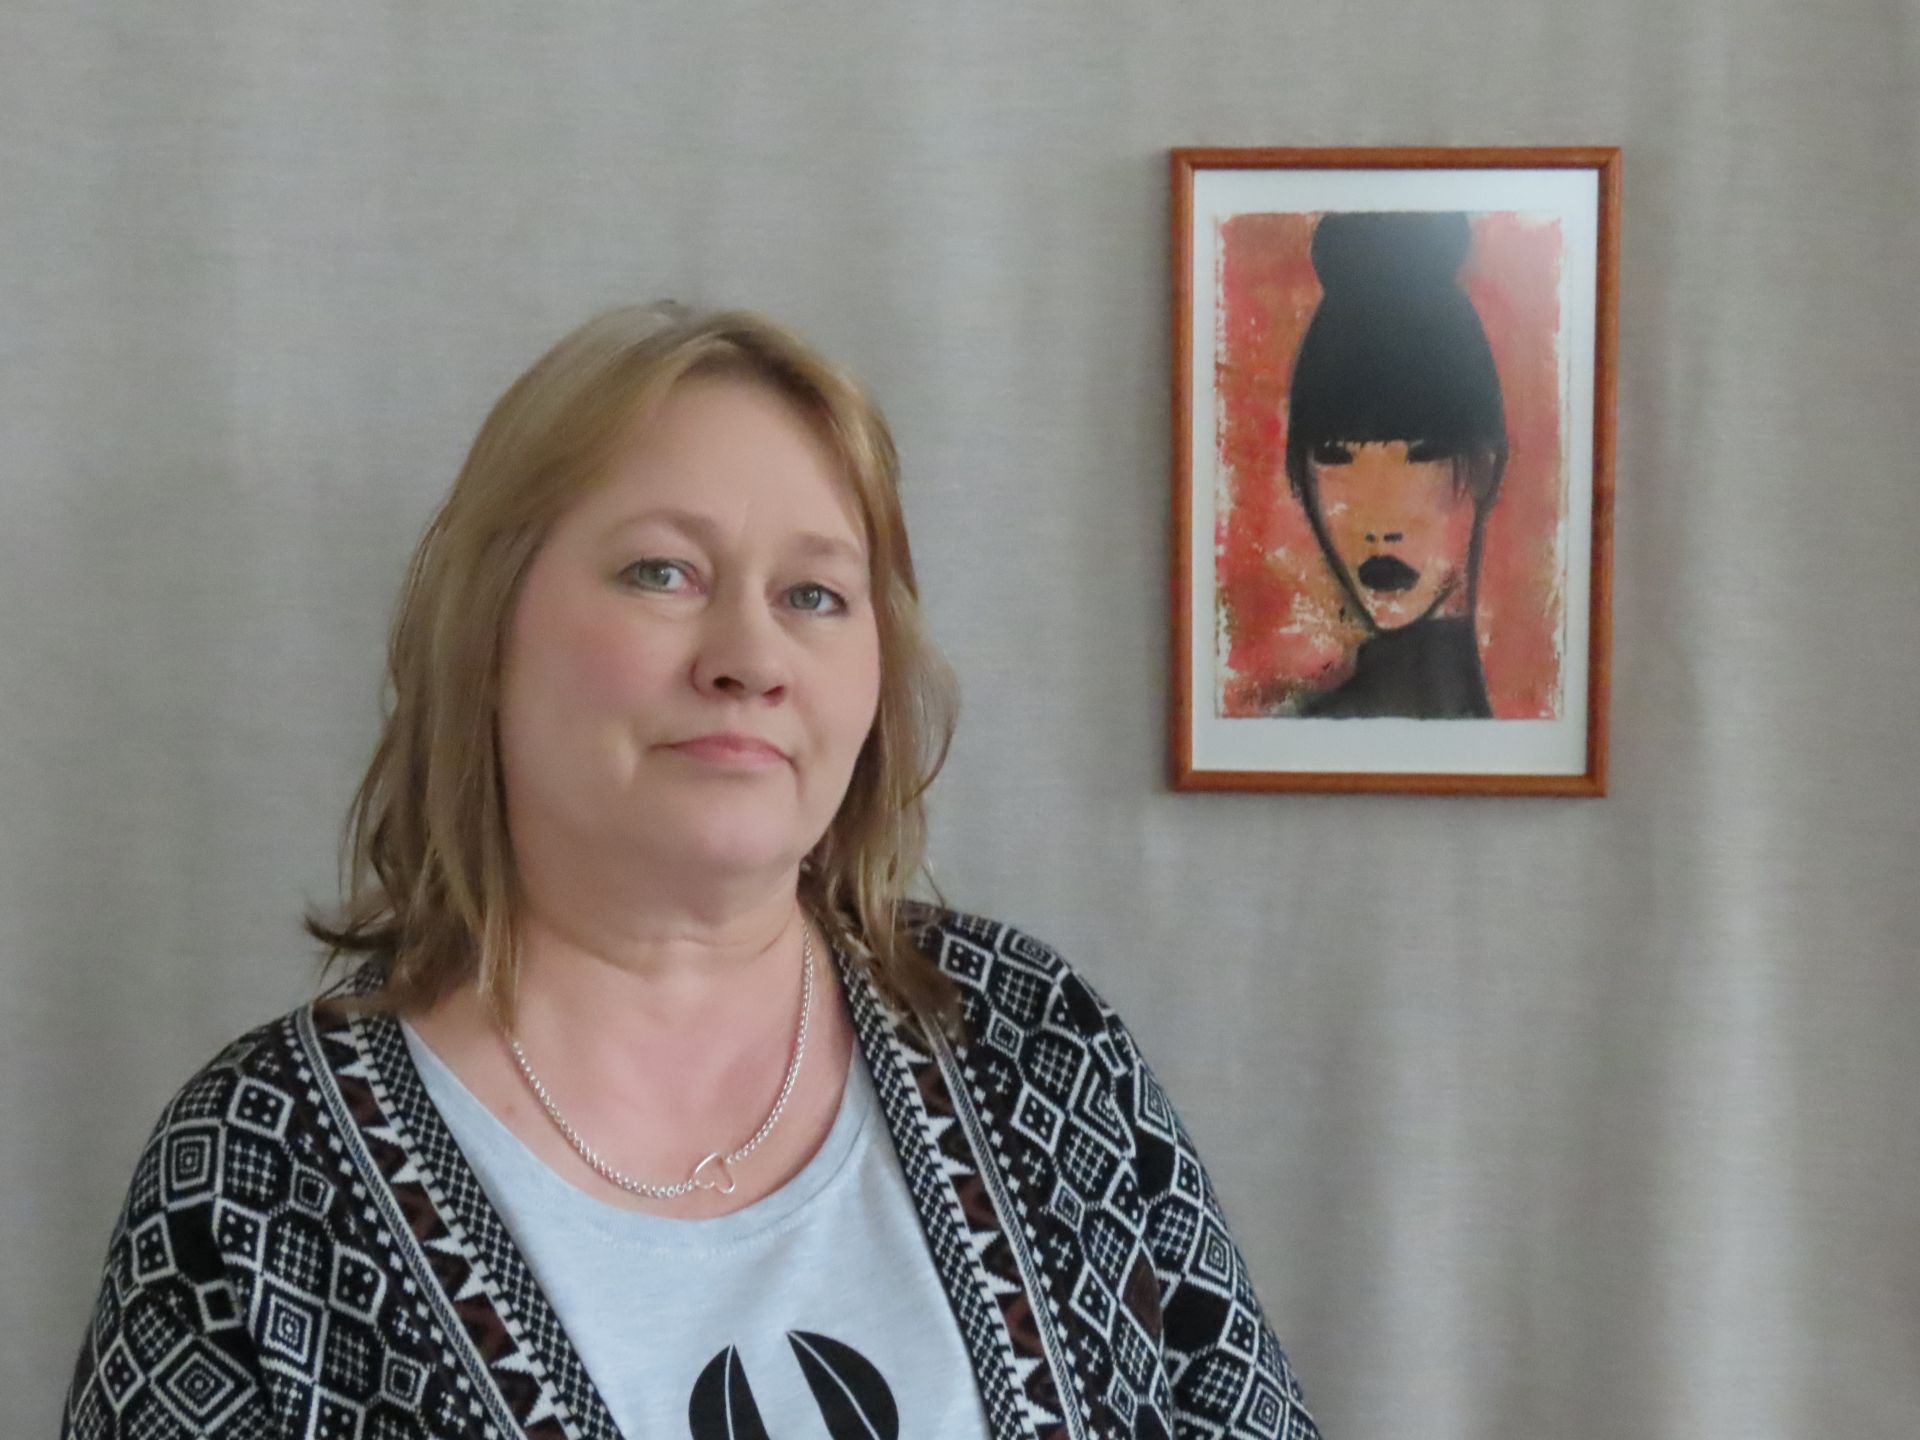 Artist Helena Junttila next to a portrait, in black ink with a red background, of a person.